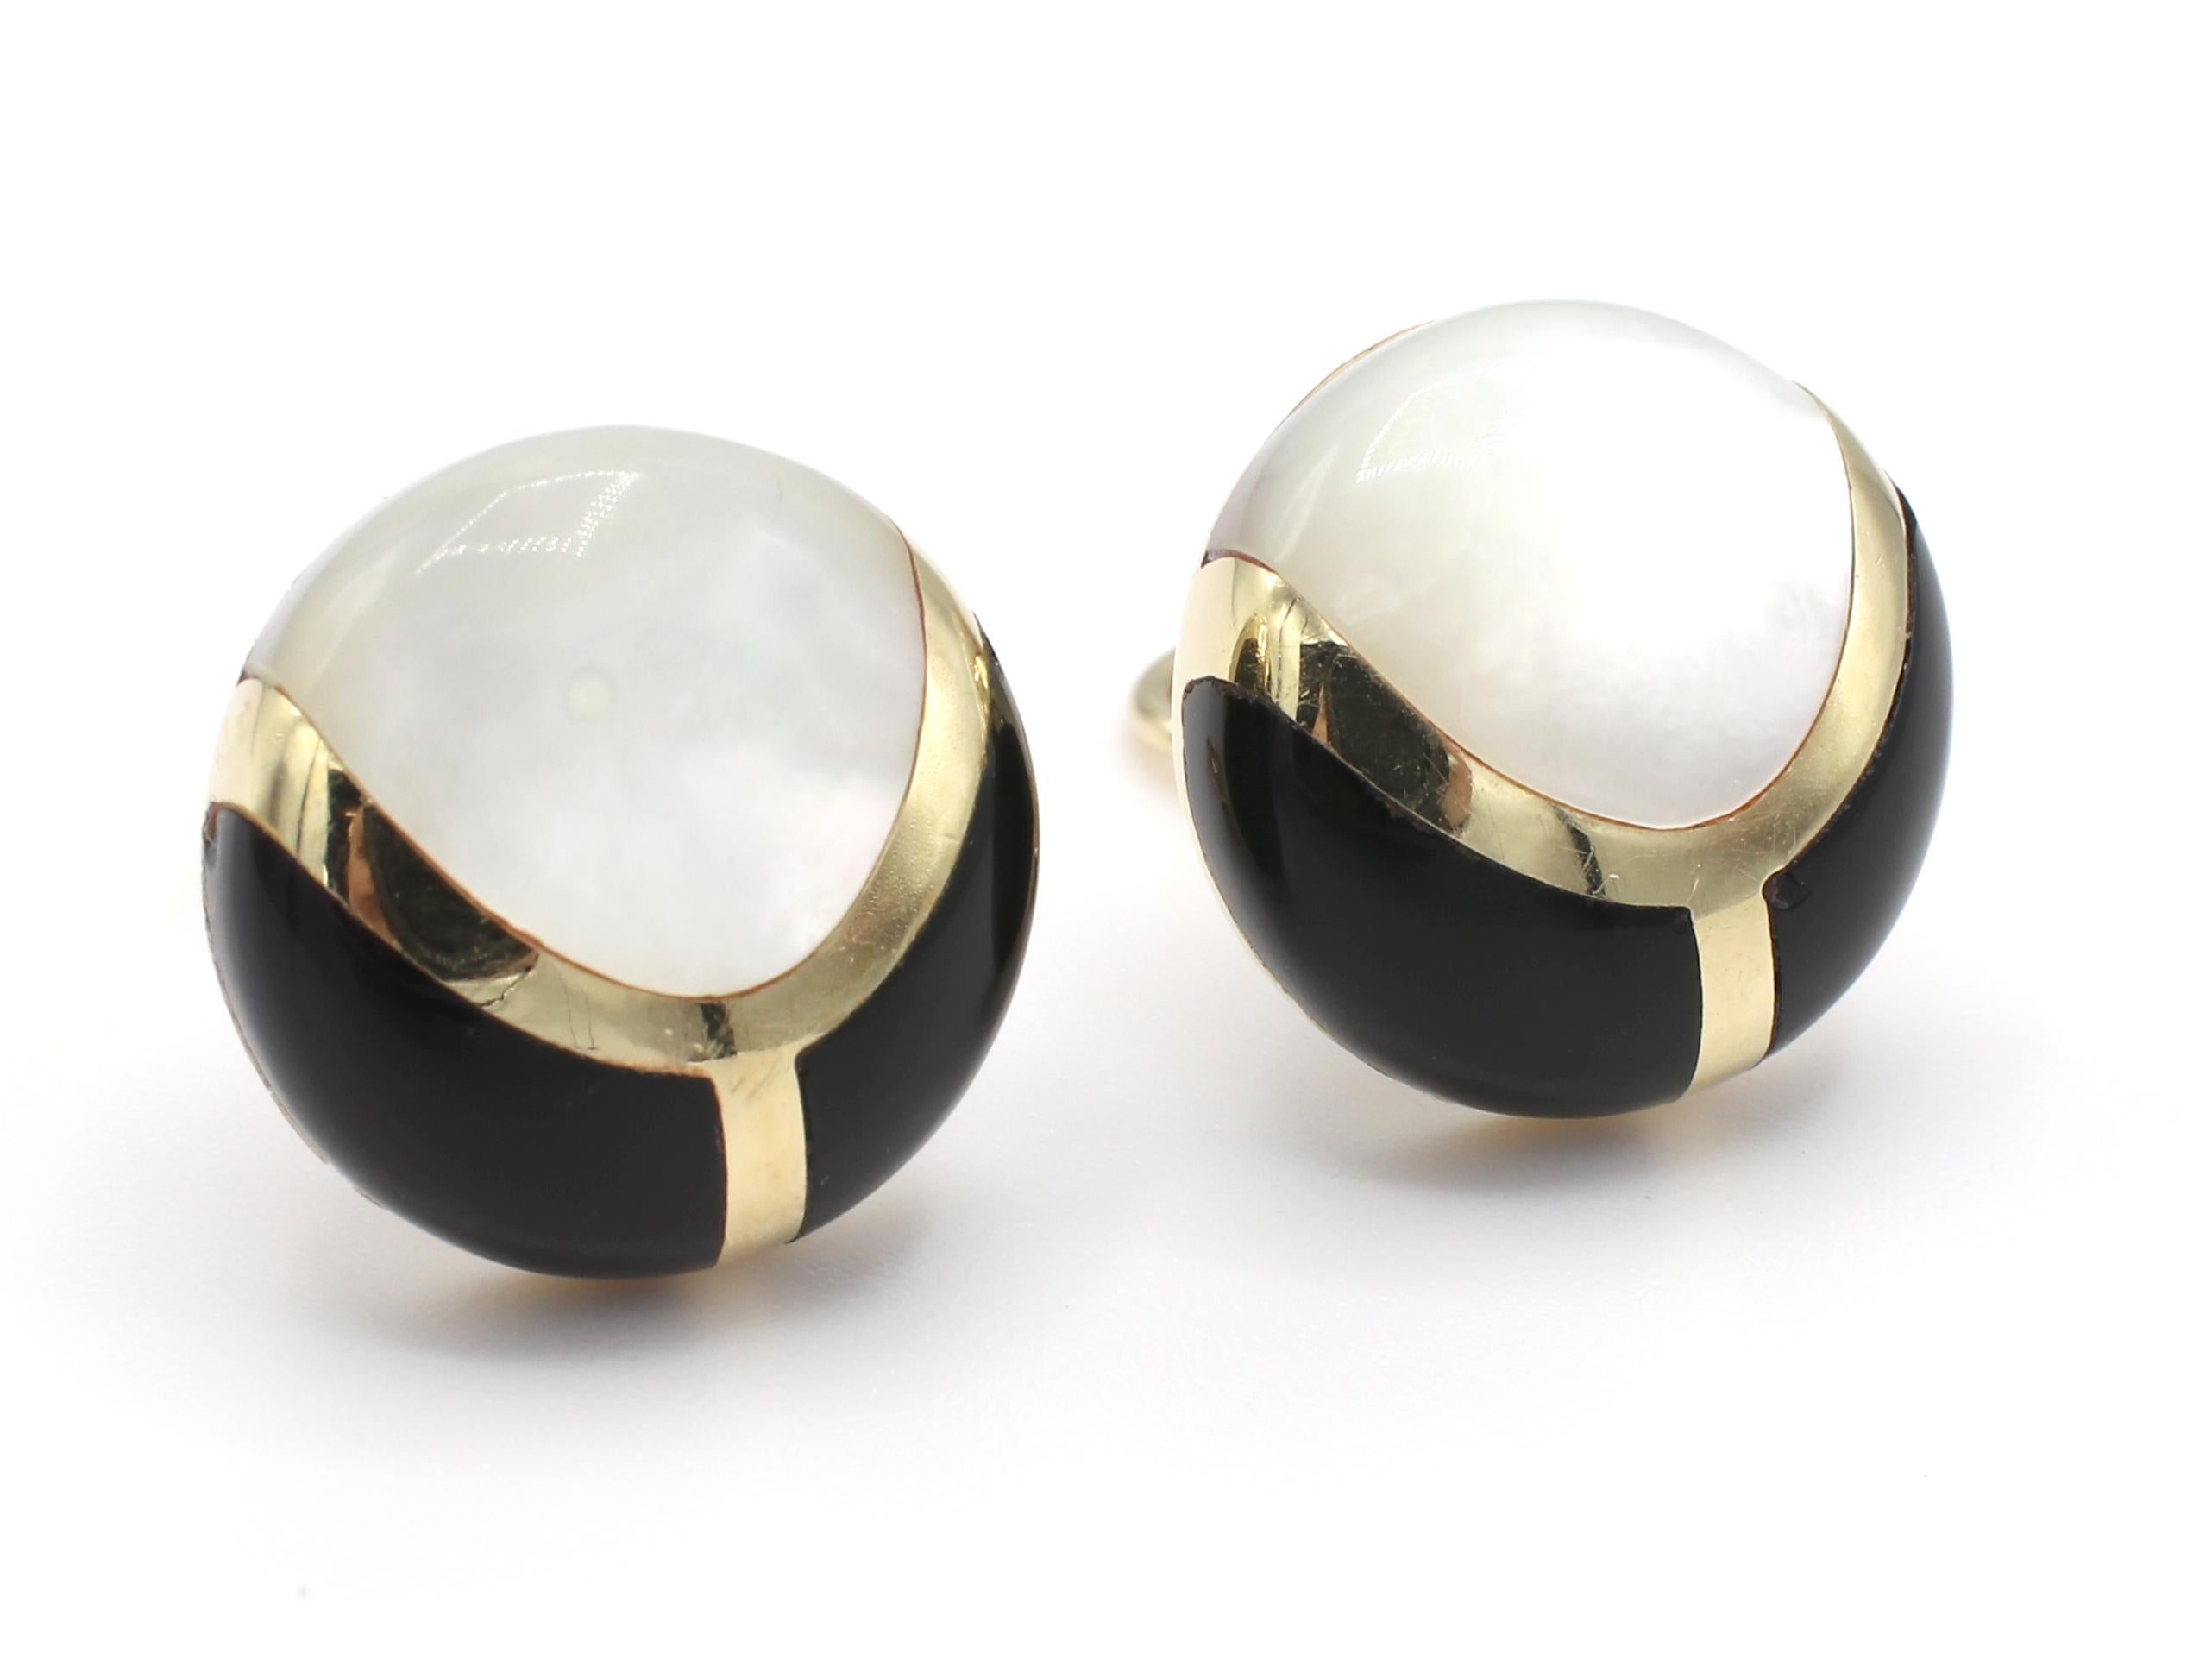 Black Onyx & Mother of Pearl Inlay Yellow Gold Button Earrings 
Metal: 14k yellow gold
Weight: 13.39 grams
Diameter: 16.5mm
Backs: Lever backs, clip on
